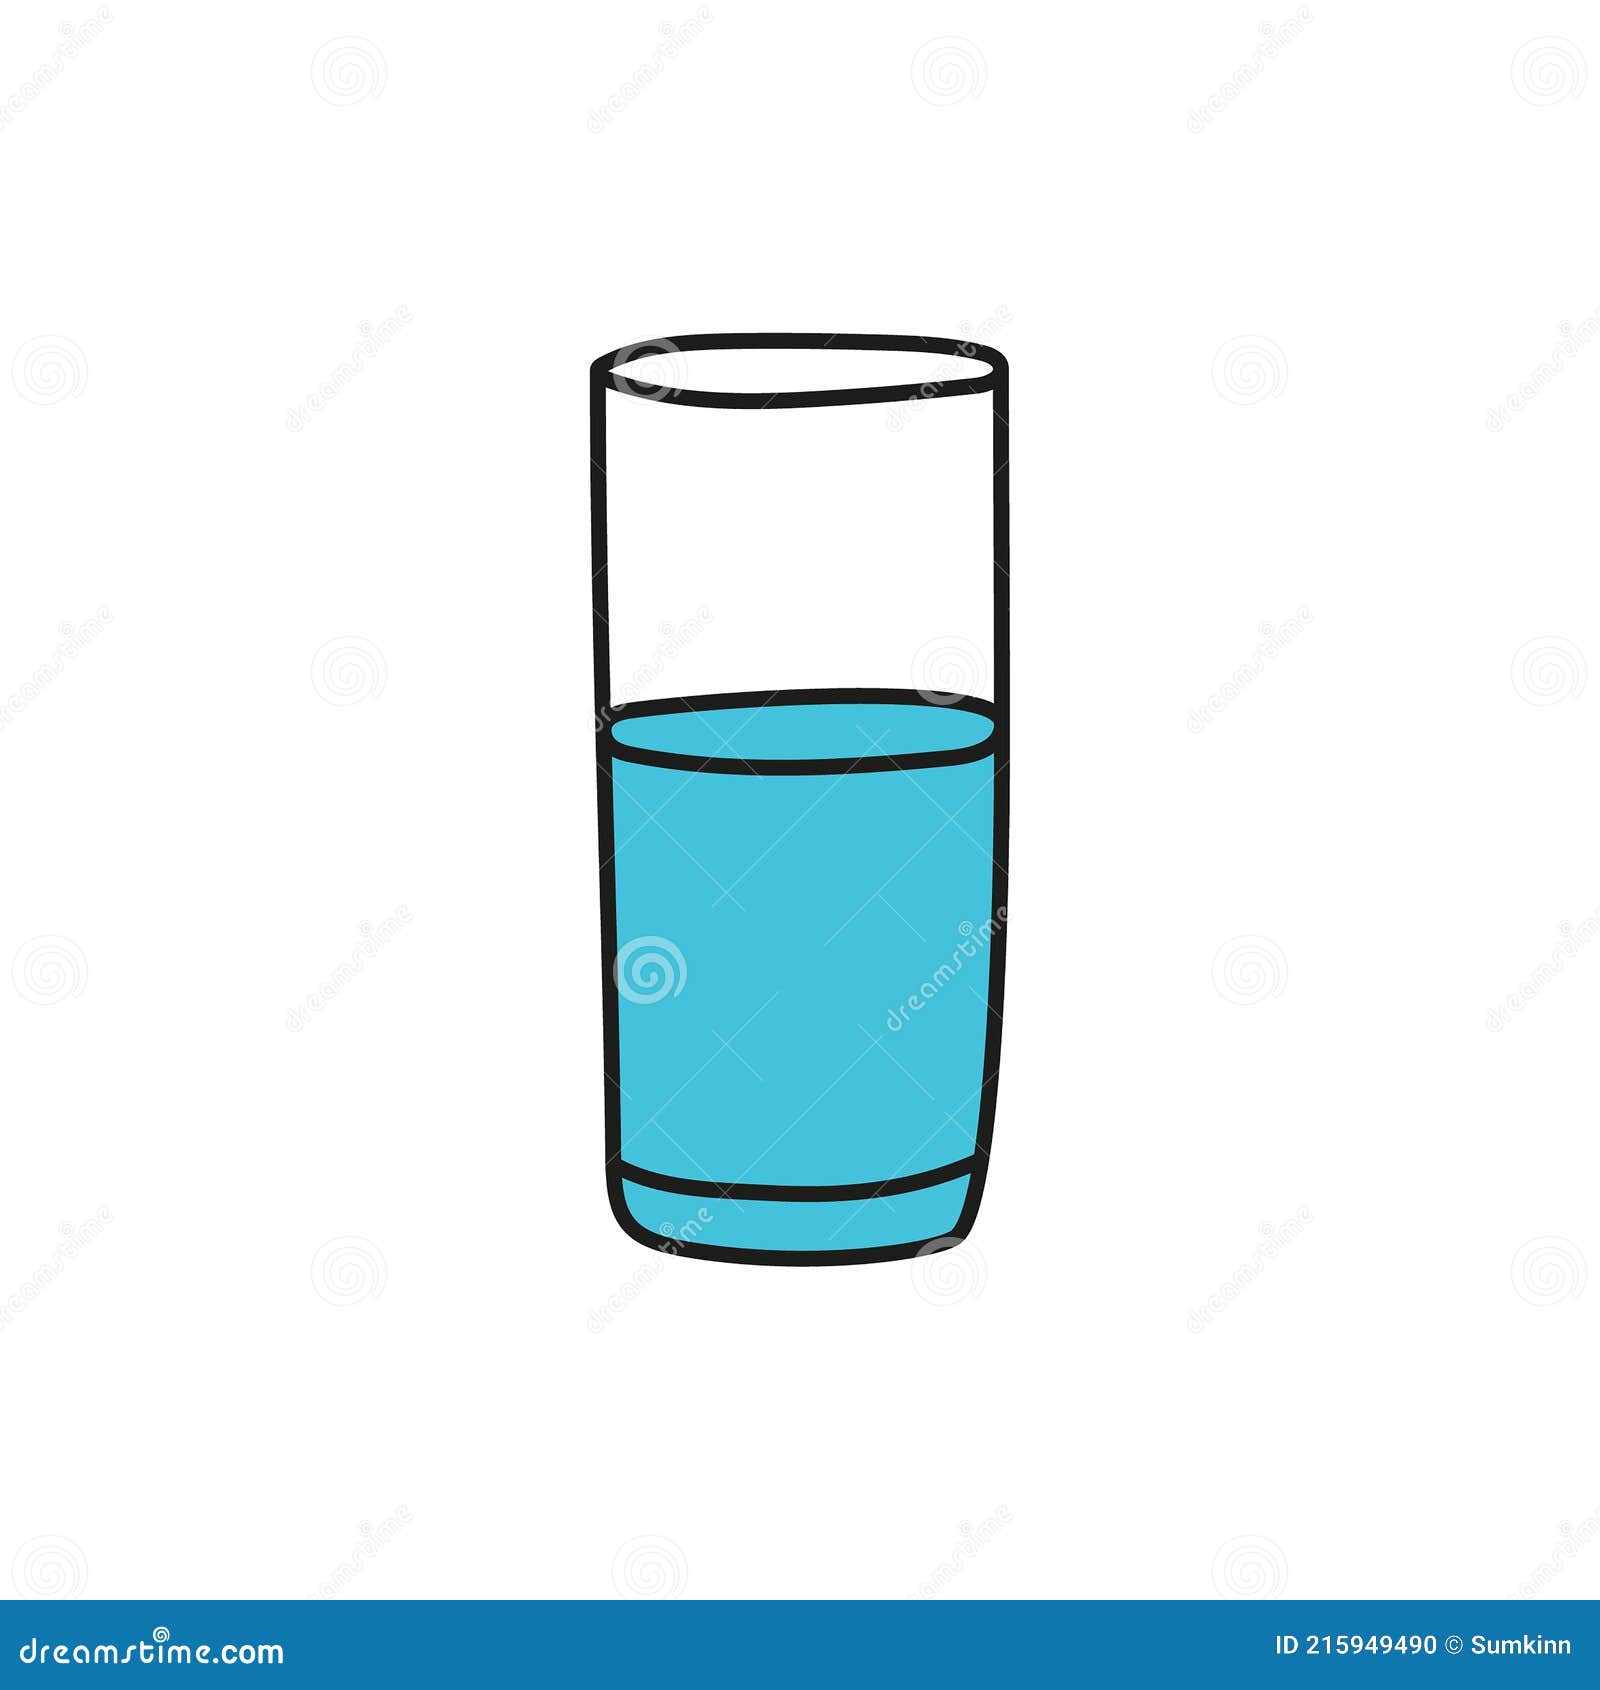 Water cup drawing Vectors & Illustrations for Free Download | Freepik